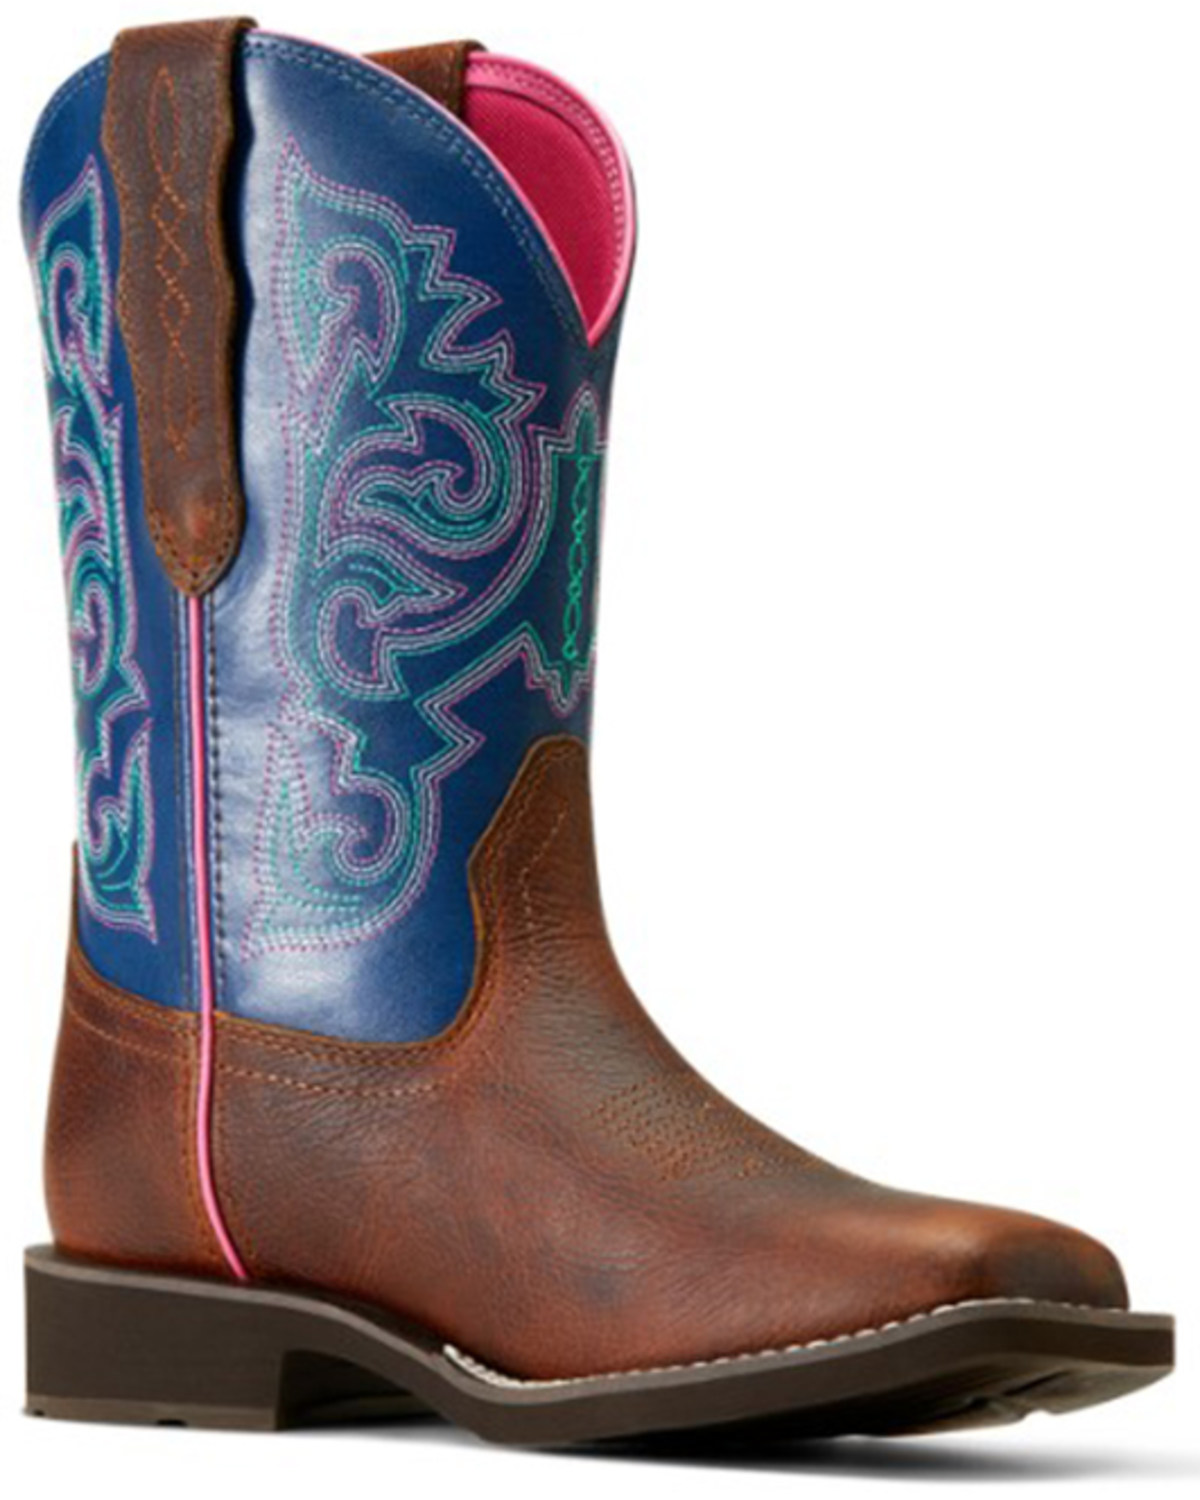 Ariat Women's Delilah StretchFit Western Boots - Broad Square Toe